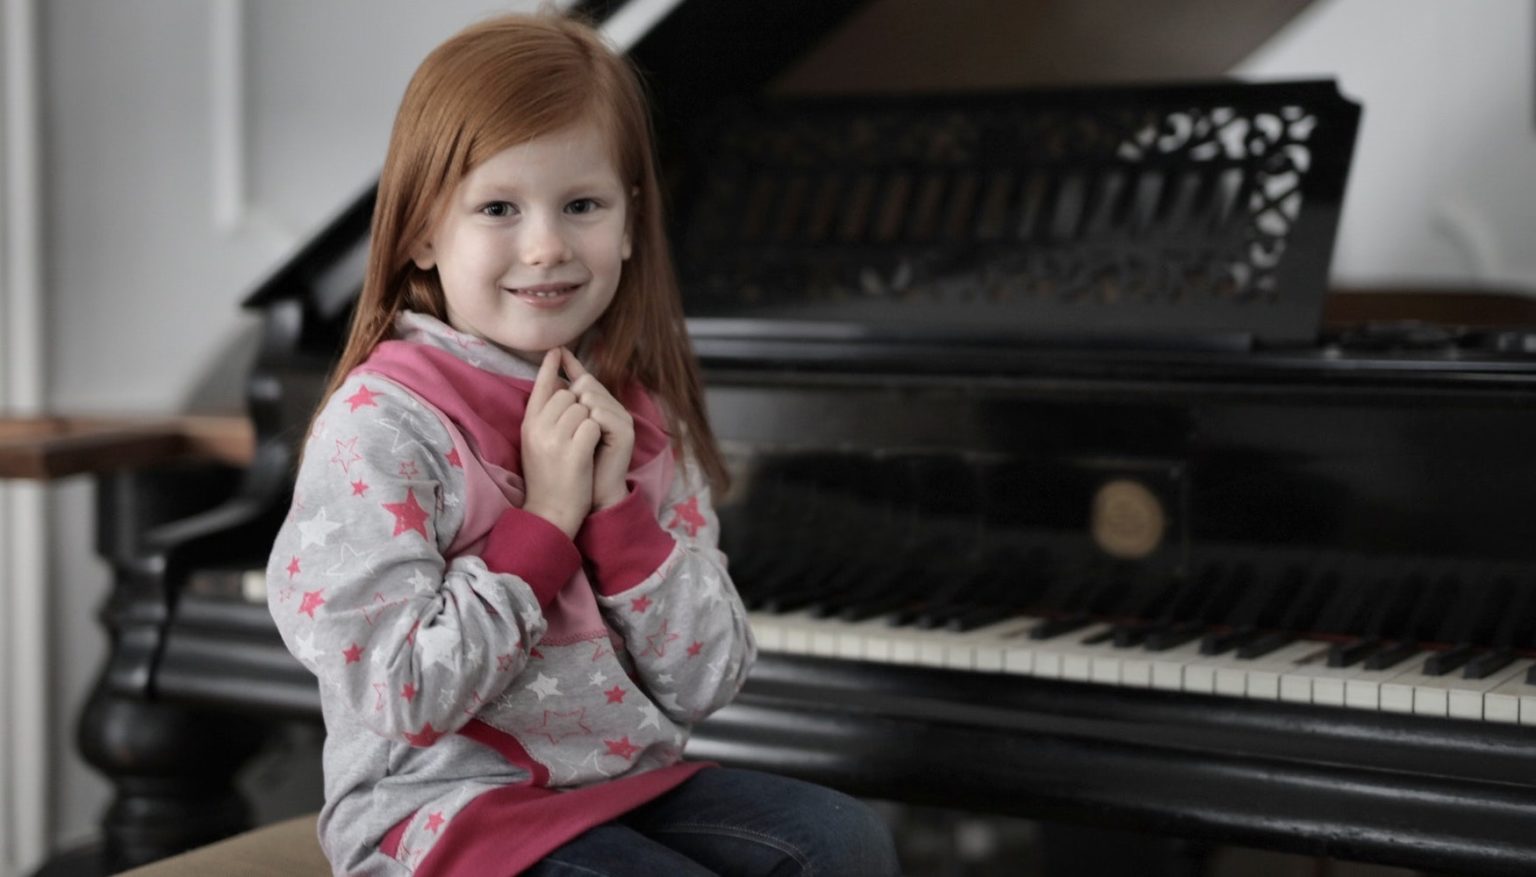 Flower Mound music academy. music lessons in flower mound. we offer piano, violin, viola, cello & guitar lessons.